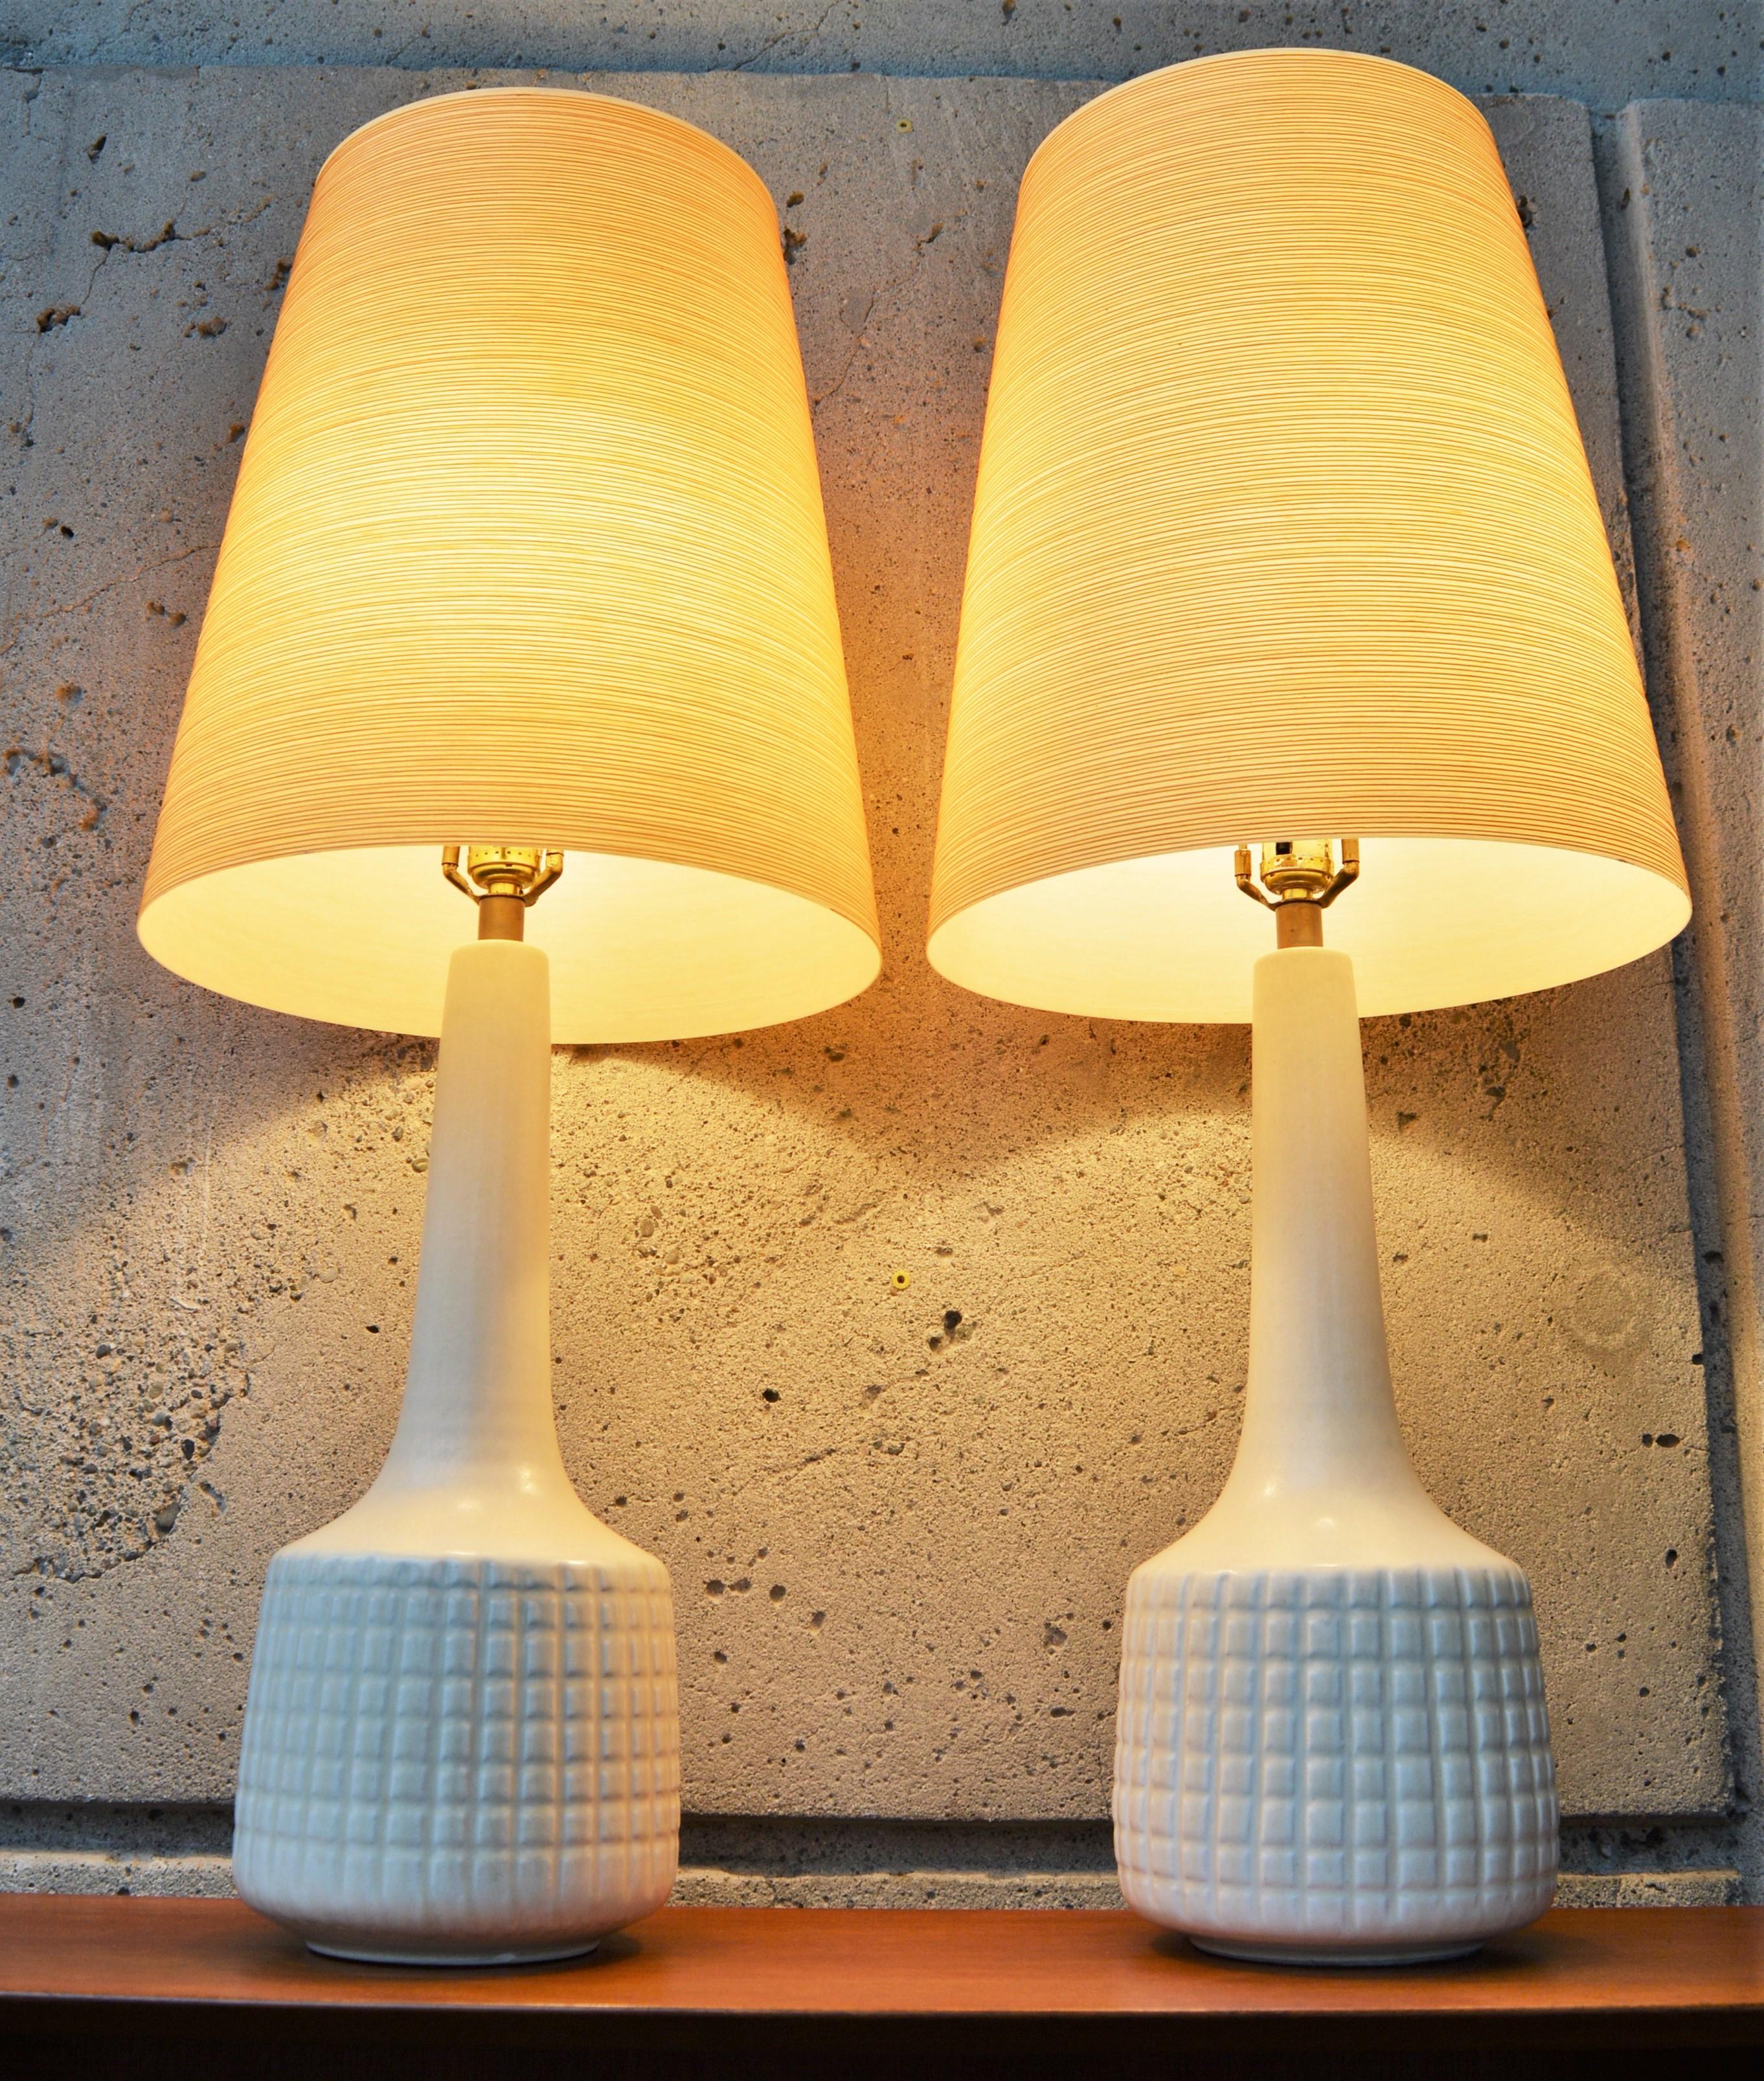 Brass Incised Cream Ceramic Lotte & Gunnar Bostlund Lamps with Fiberglass Shades, Pair For Sale